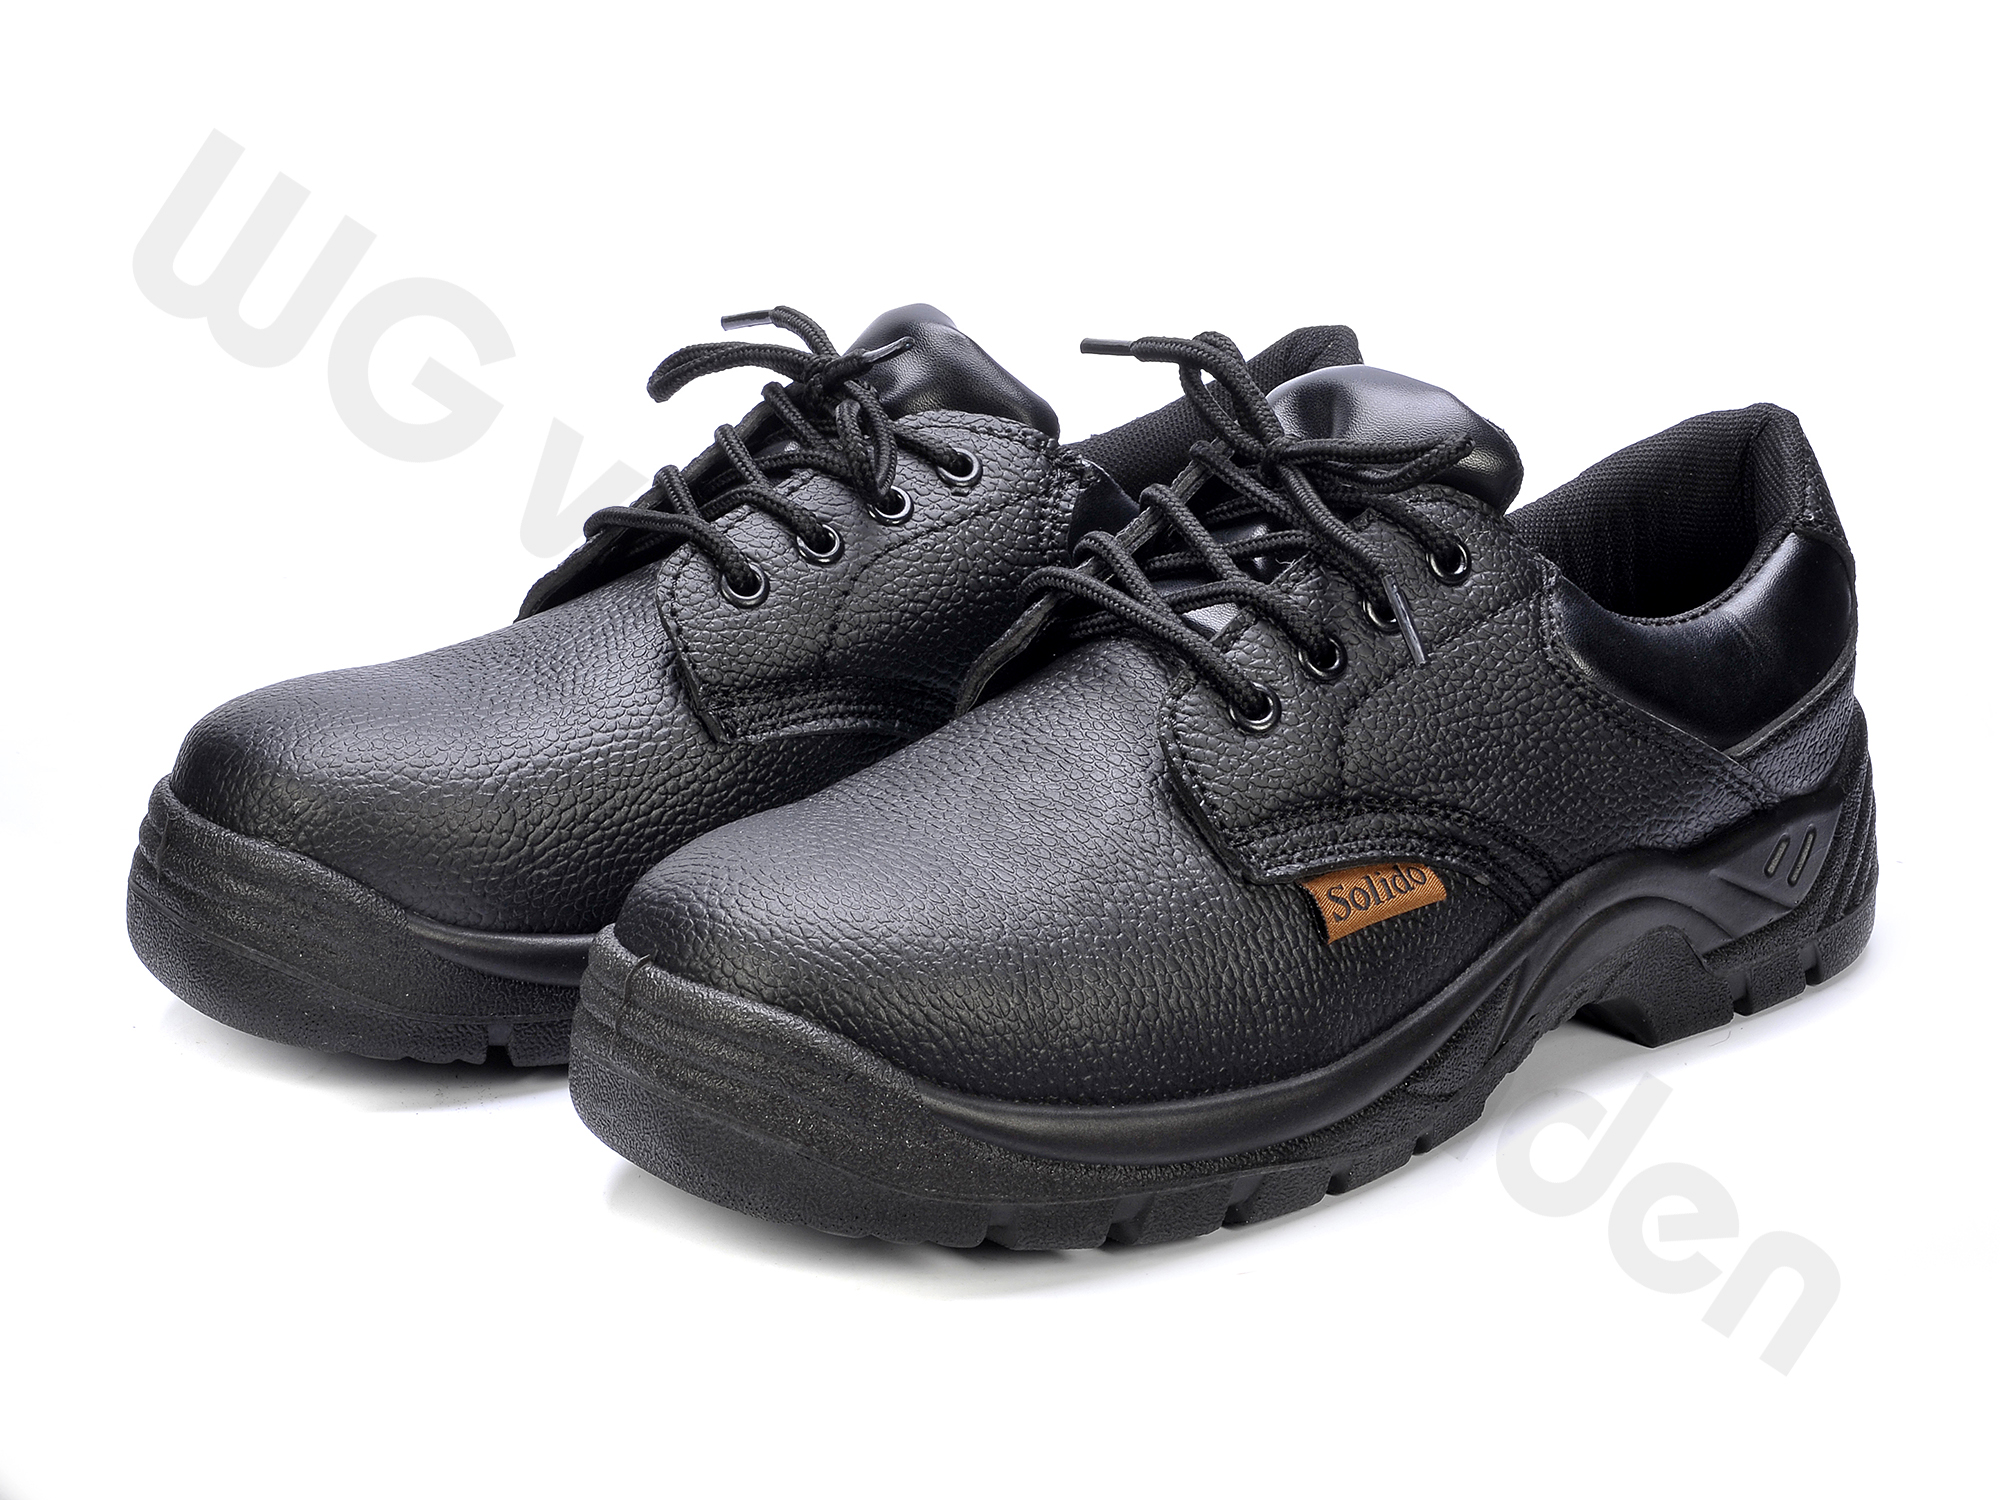 880611 SHOES SAFETY S1 WITH STEEL TOE SIZE 48 / 30CM CE